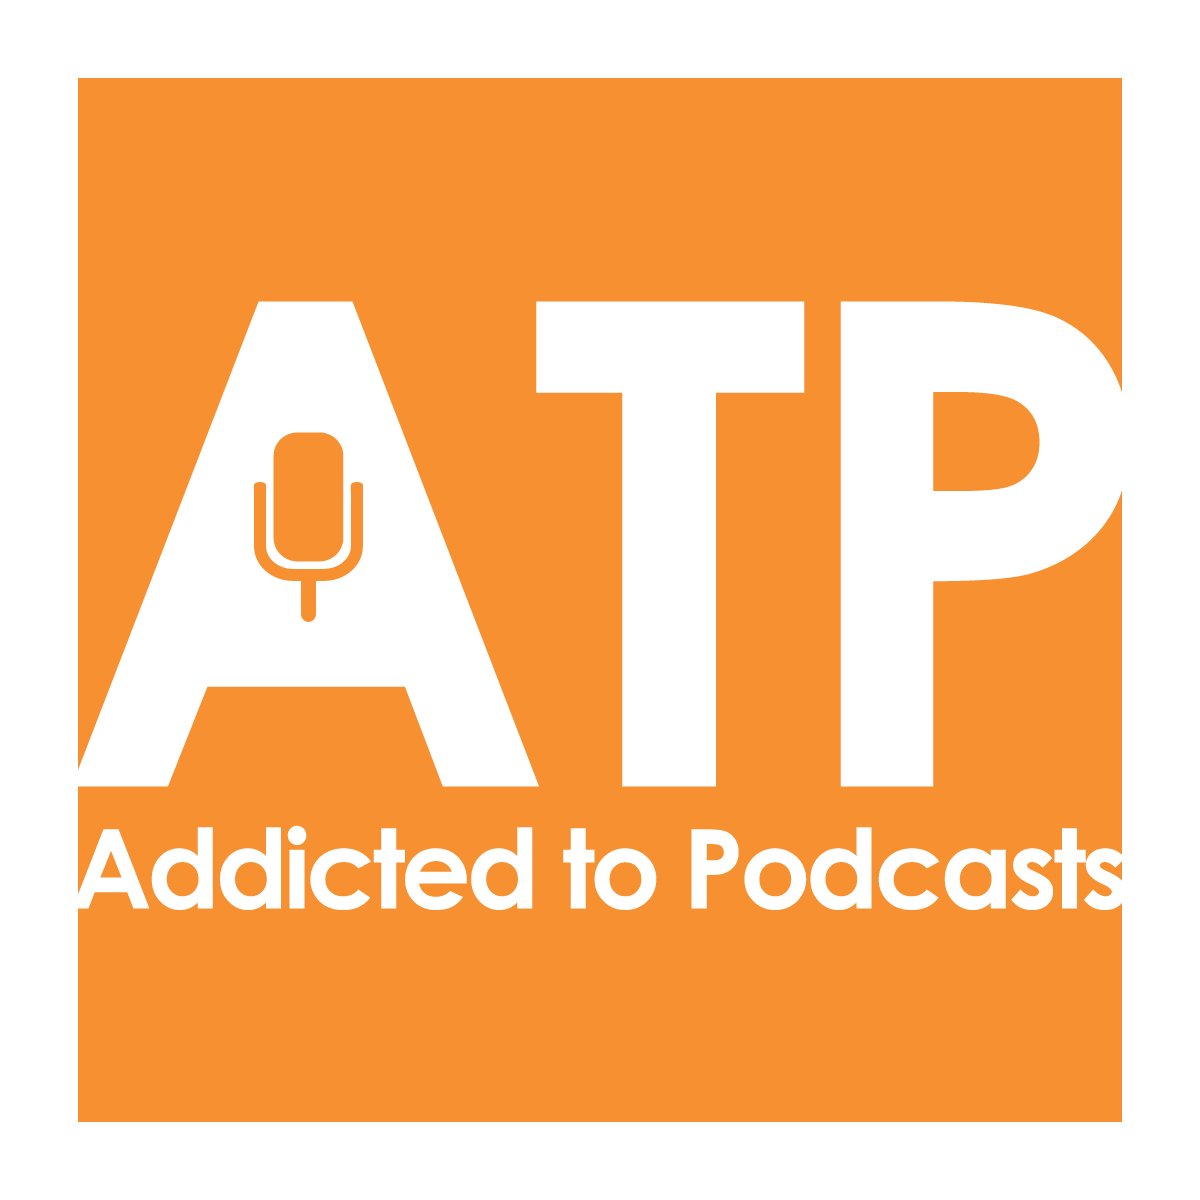 I'm addicted, you're addicted, we're all addicted to #Podcasts #AddictedToPodcasts